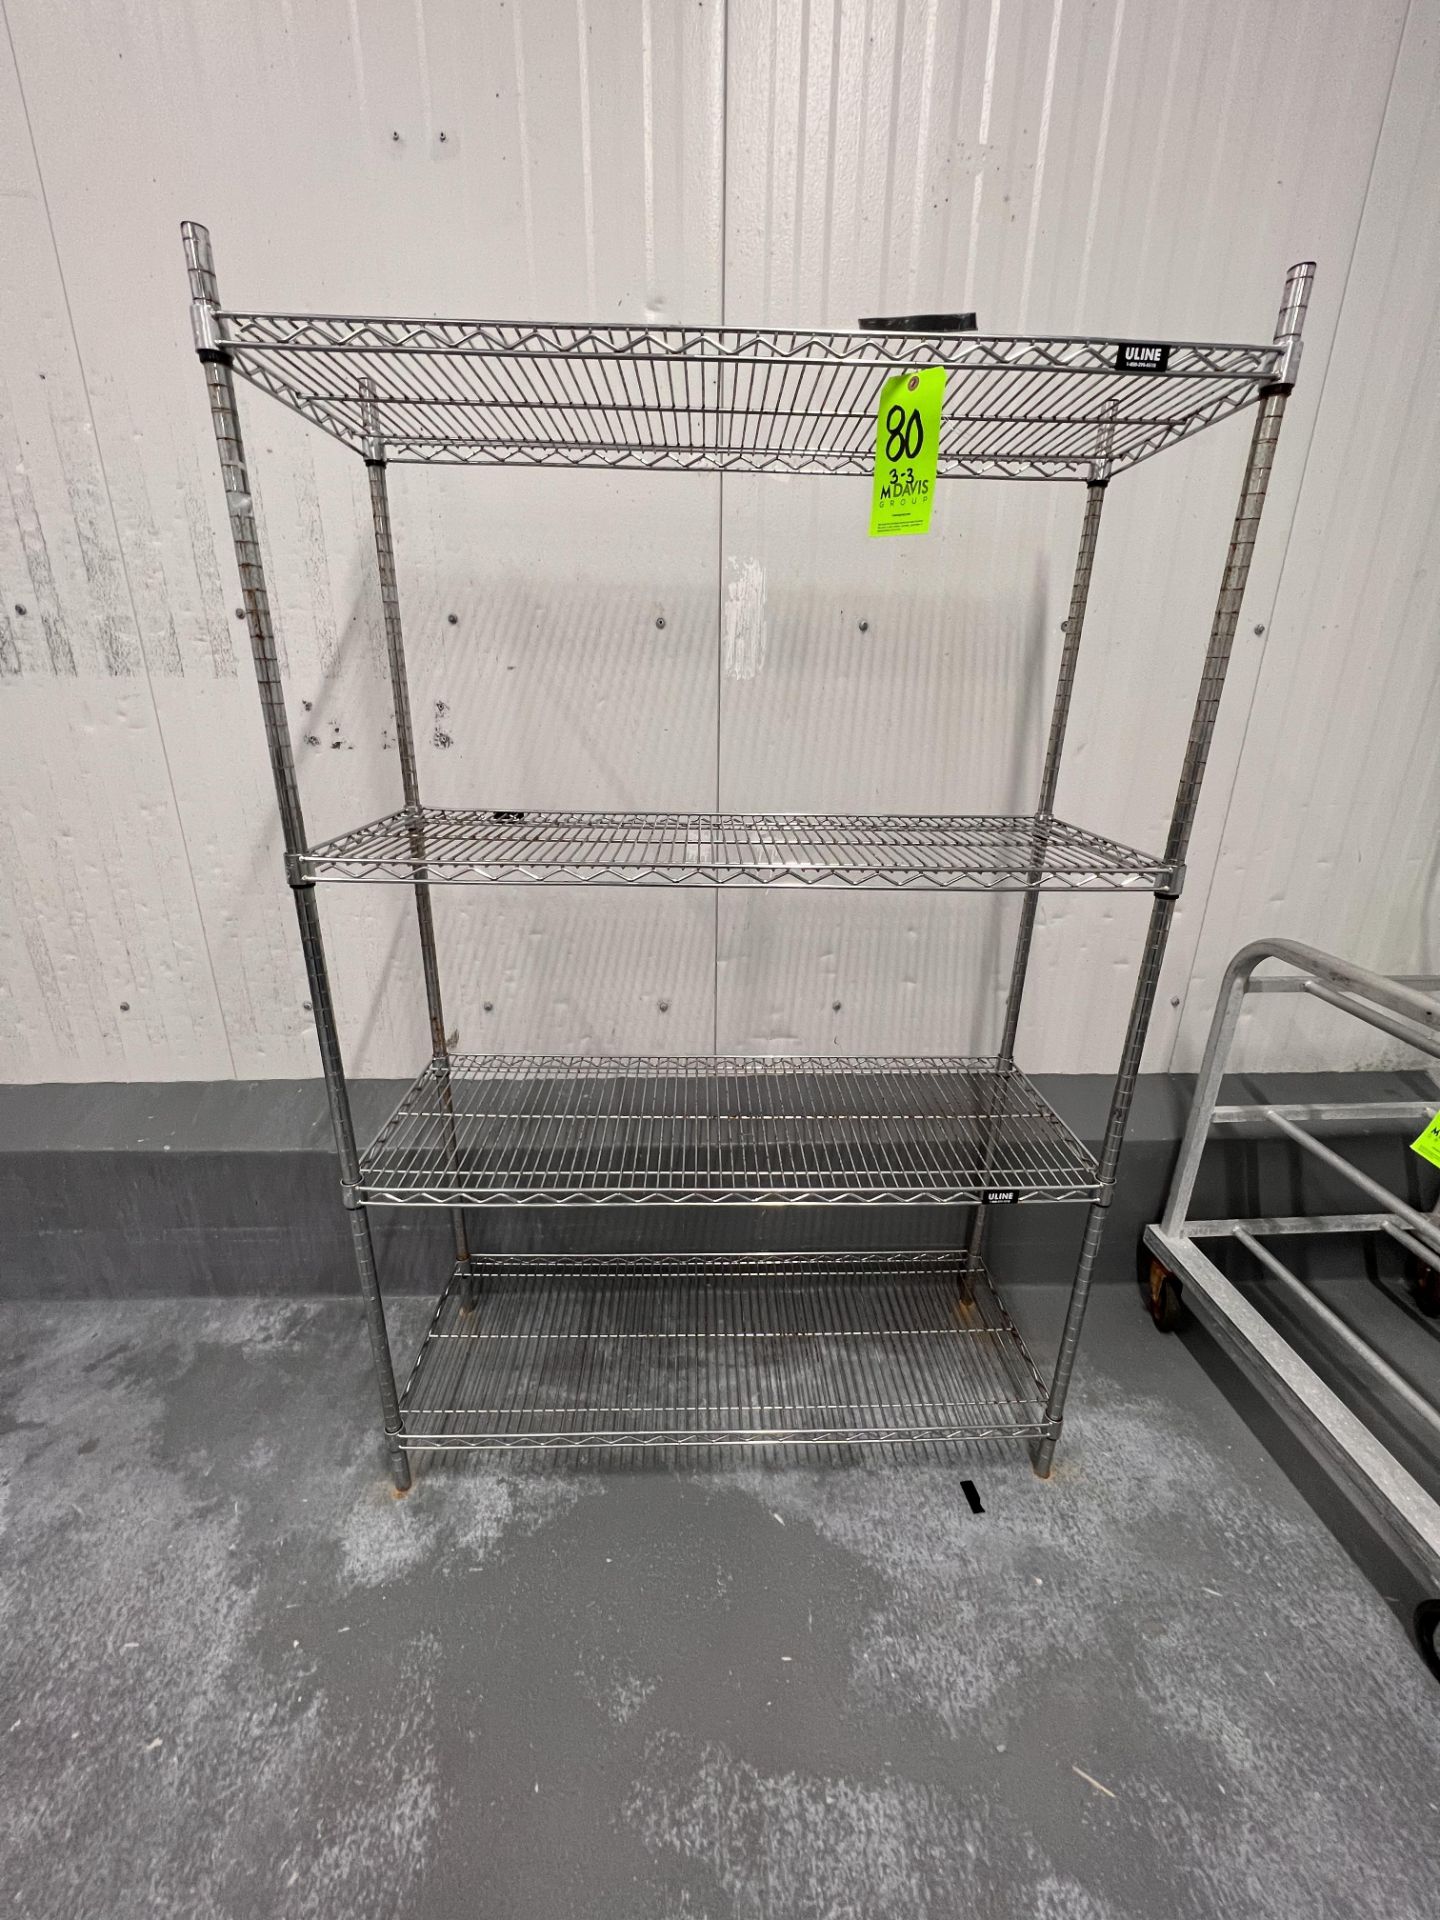 (3) WIRE RACKS (RIGGING & SIMPLE LOADING FEE $30.00) (NOTE: DOES NOT INCLUDE SKIDDING OR PACKAGING - Image 3 of 3